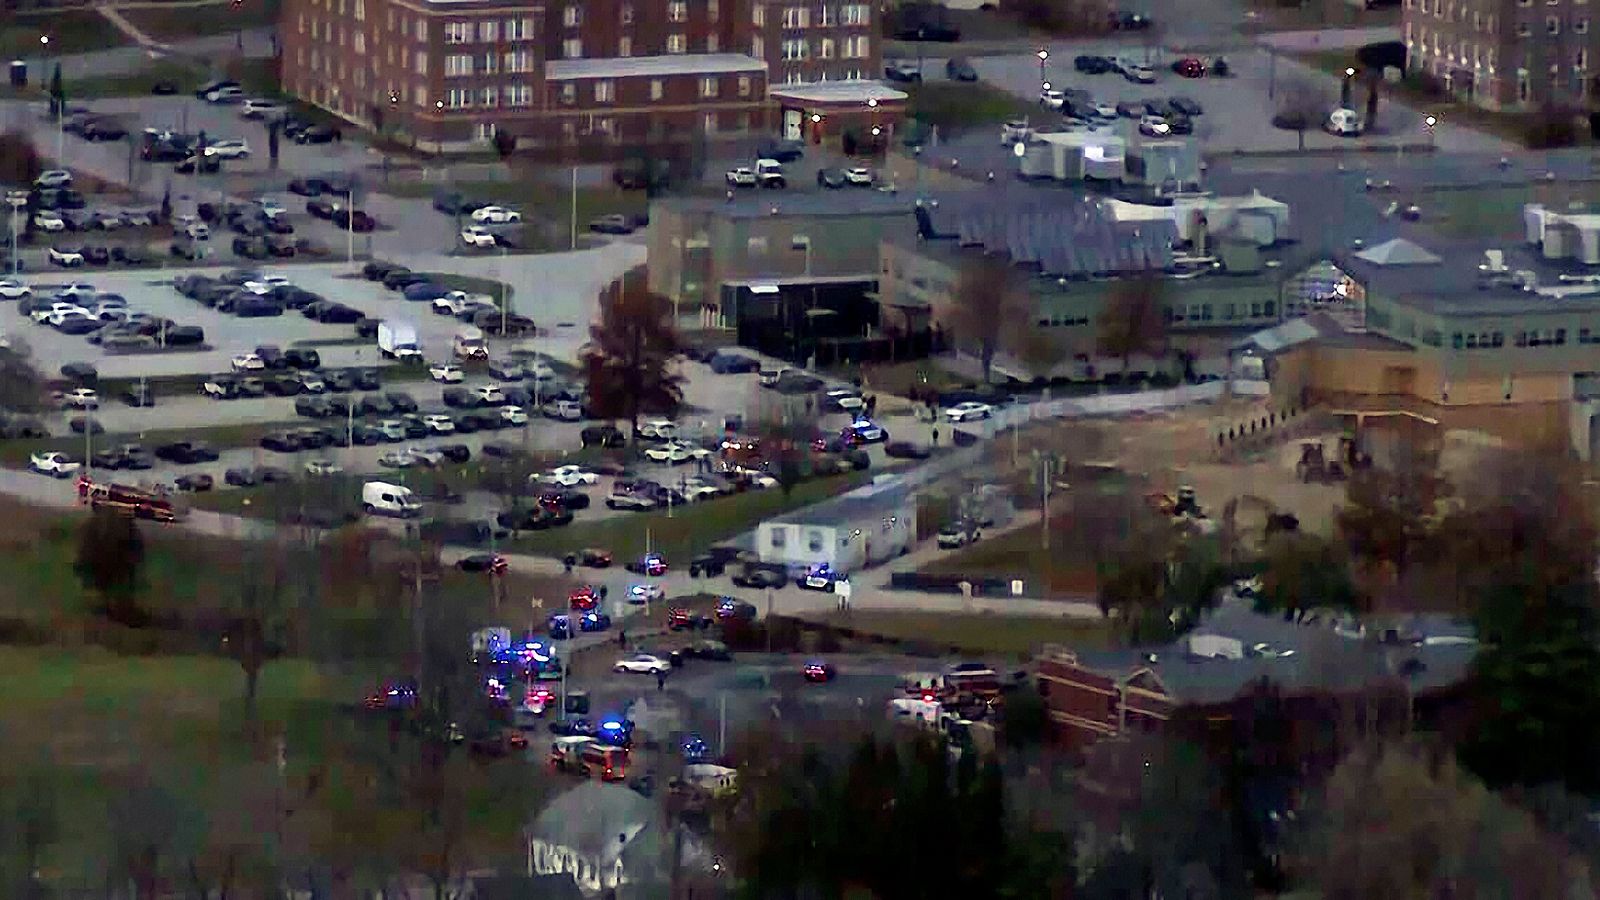 Shooting at psychatric hospital in New Hampshire, US - as police say suspect is dead